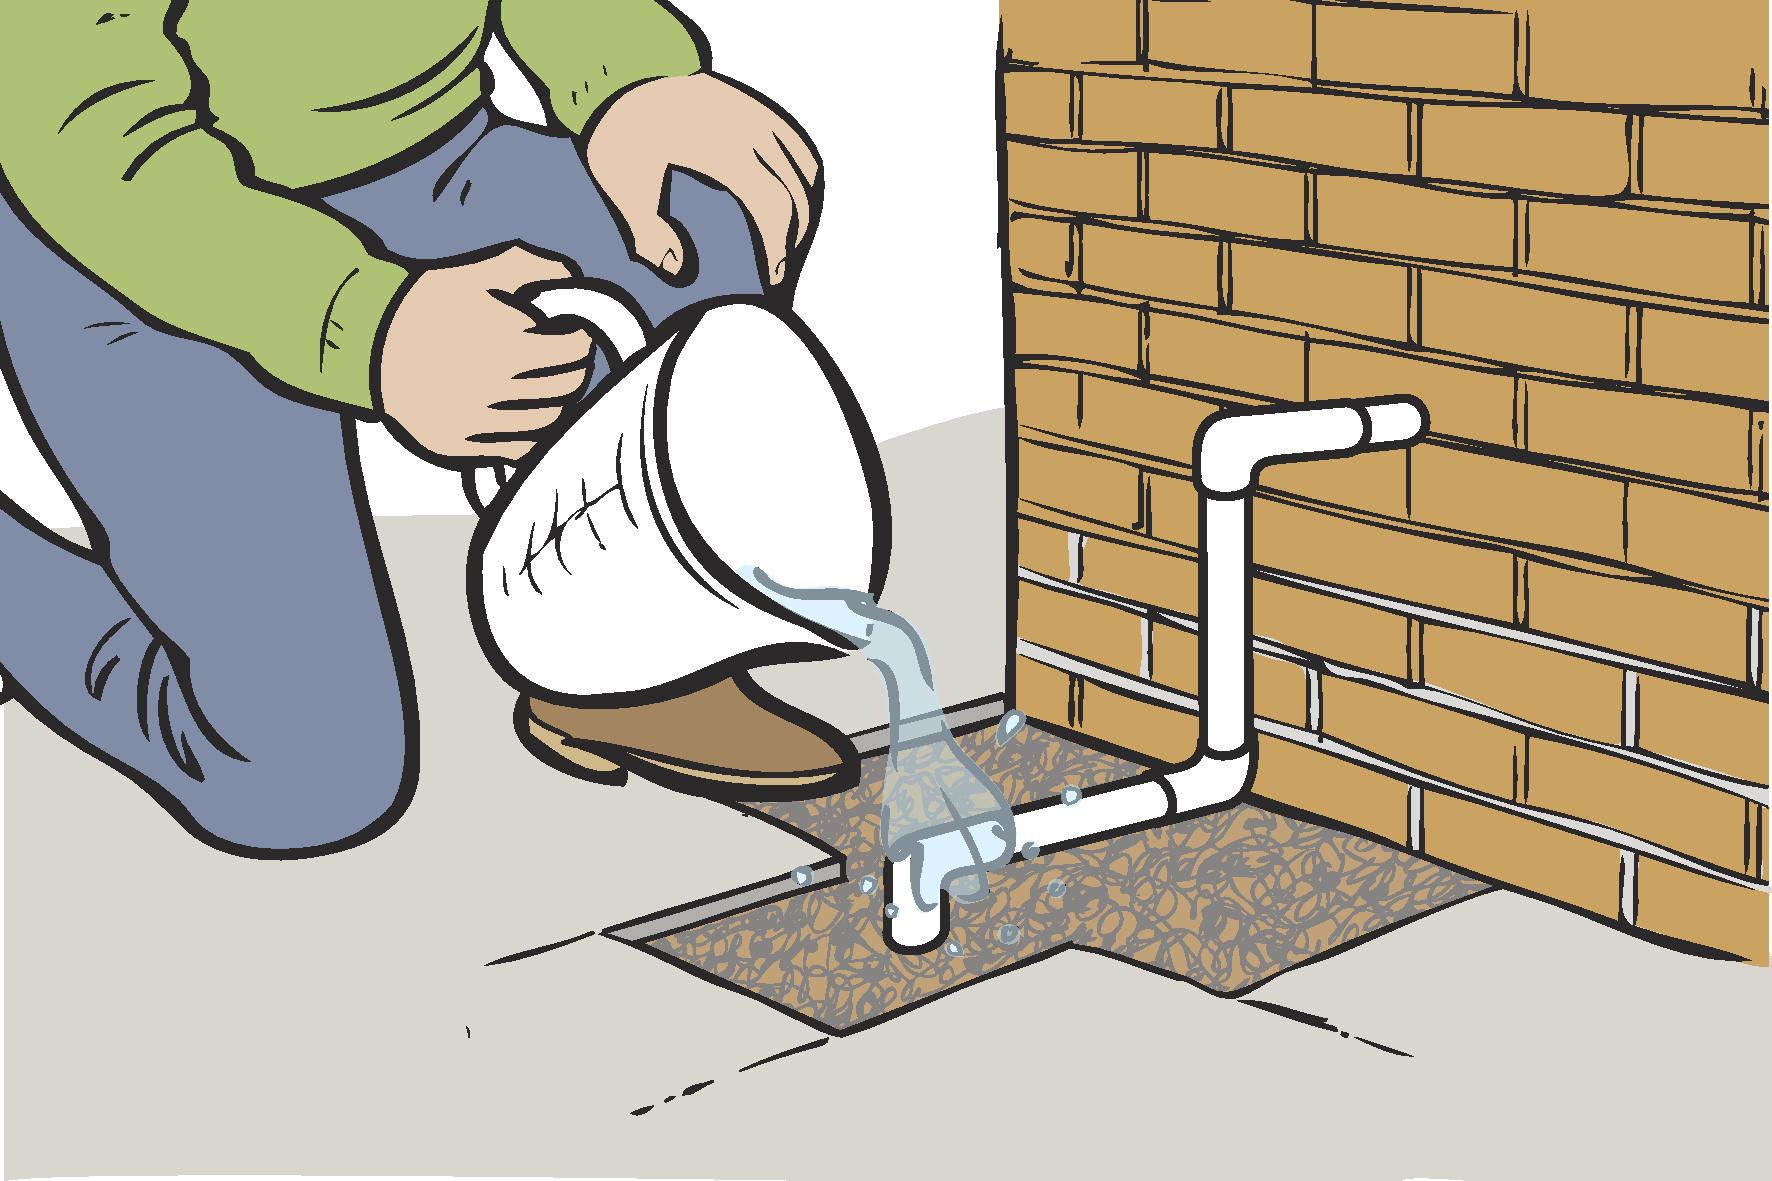 Pour warm water on the pipe